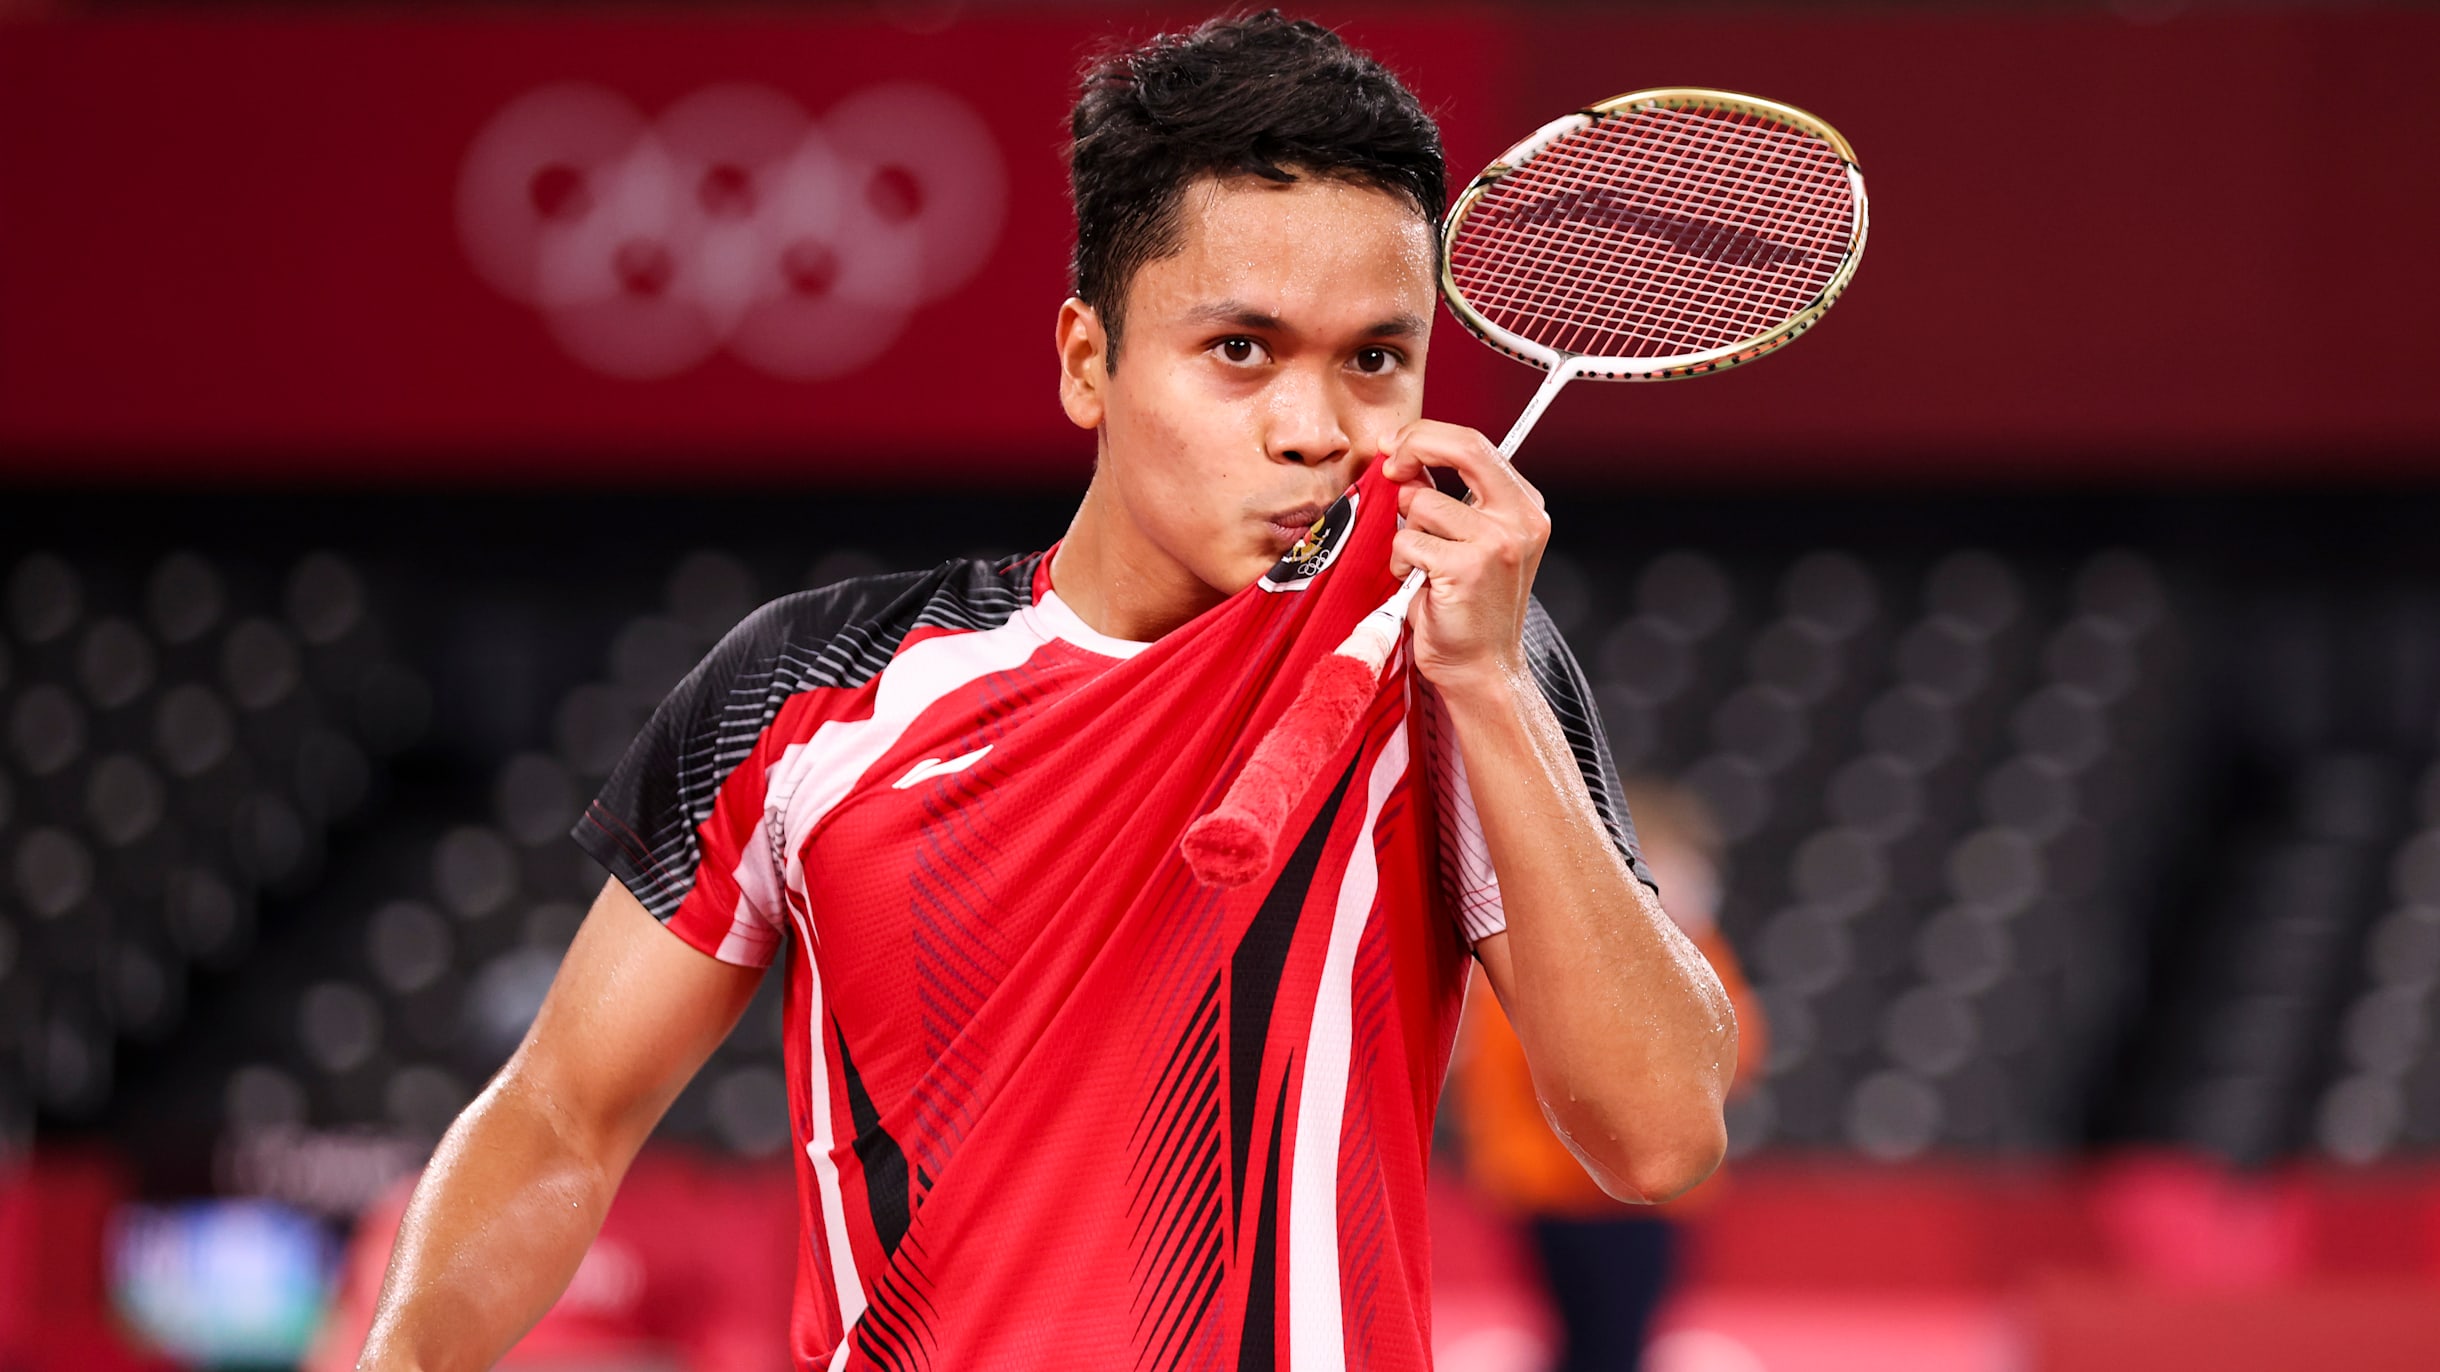 Badminton Indonesia Masters 2021 Preview, schedule, and watch live streaming and telecast in Indonesia